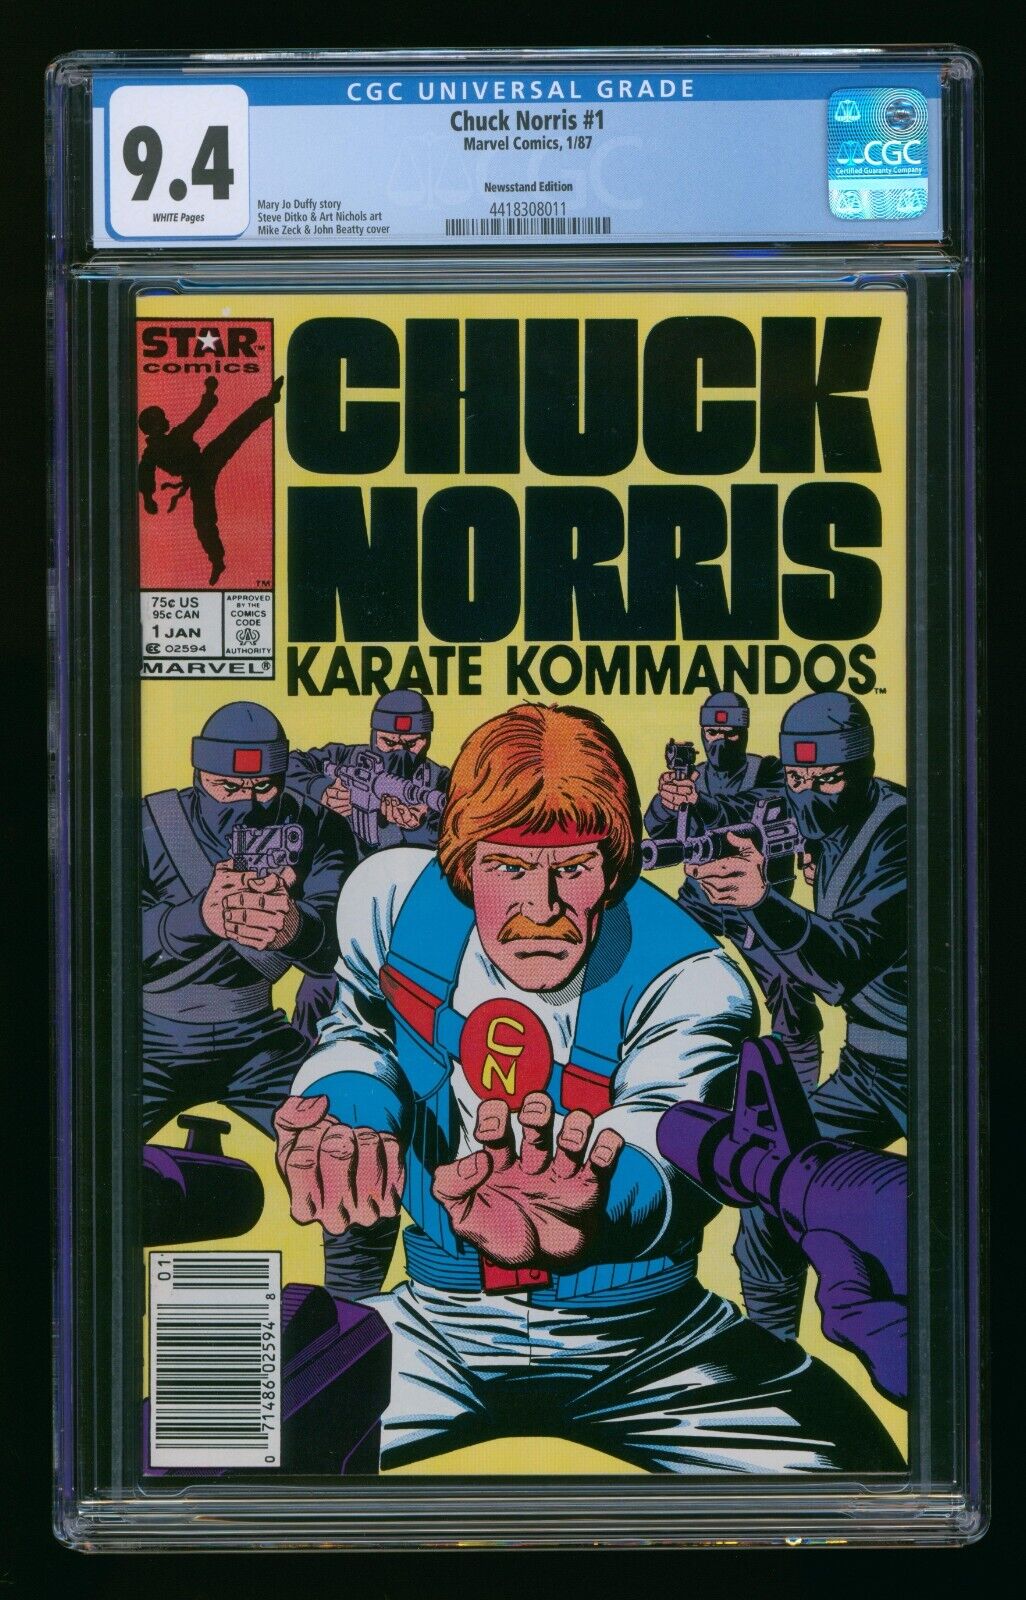 CHUCK NORRIS #1 (1987) CGC 9.4 NEWSSTAND EDITION WHITE PAGES